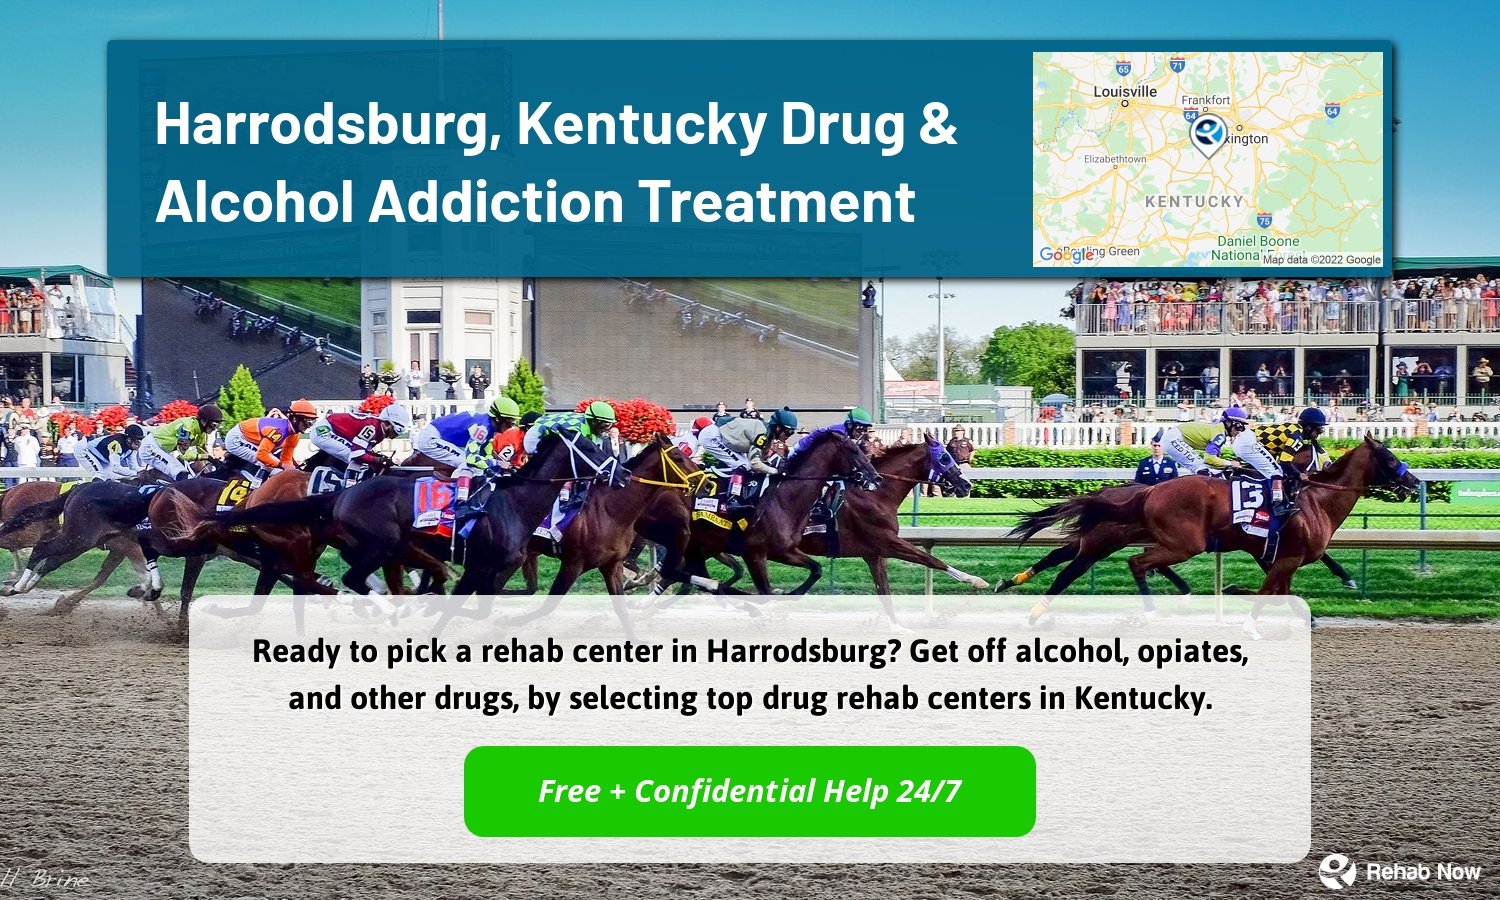 Ready to pick a rehab center in Harrodsburg? Get off alcohol, opiates, and other drugs, by selecting top drug rehab centers in Kentucky.